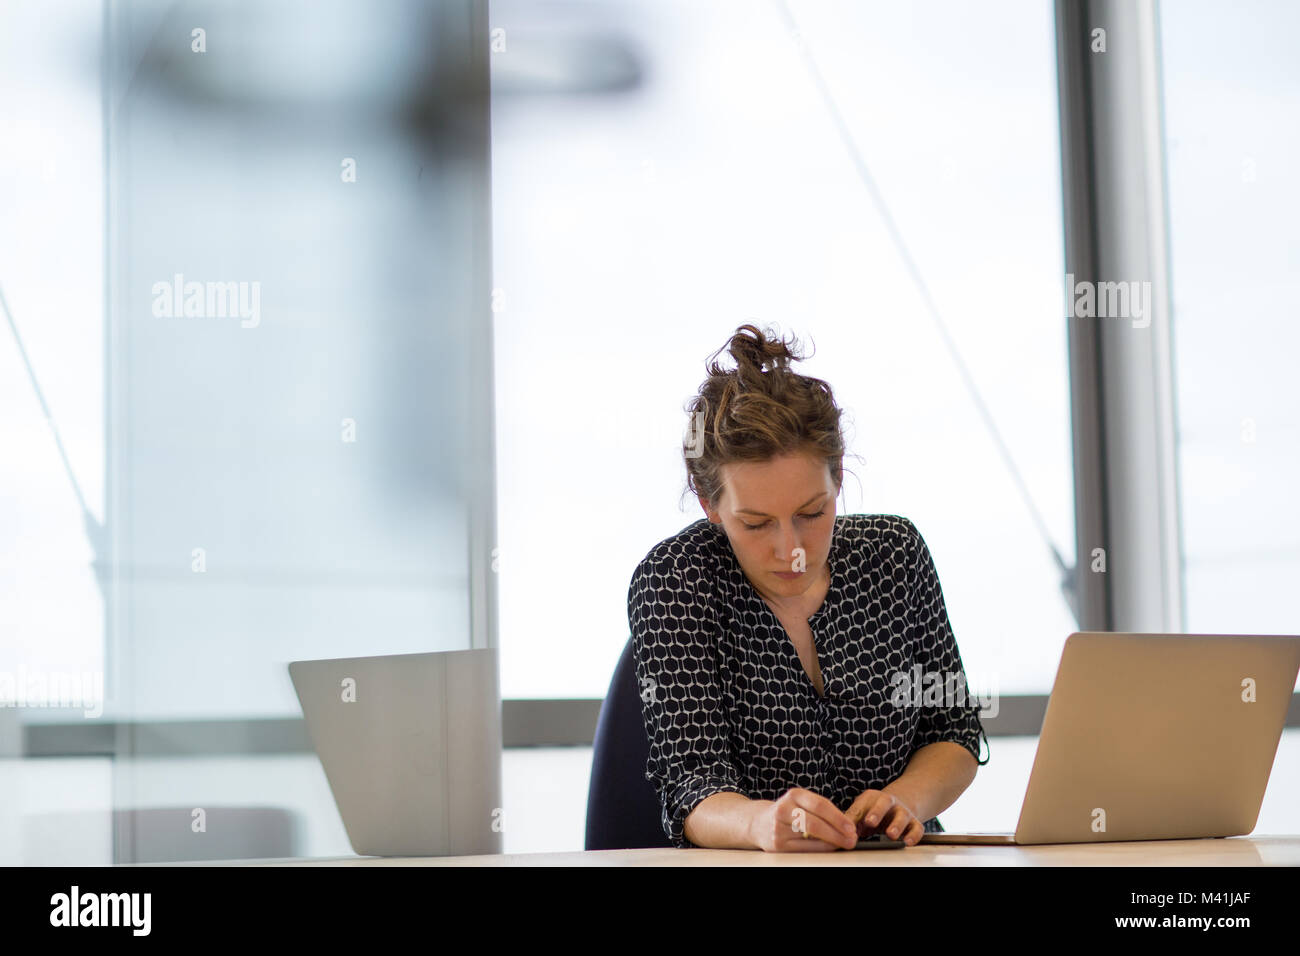 Female executive syncing smartphone to laptop Stock Photo